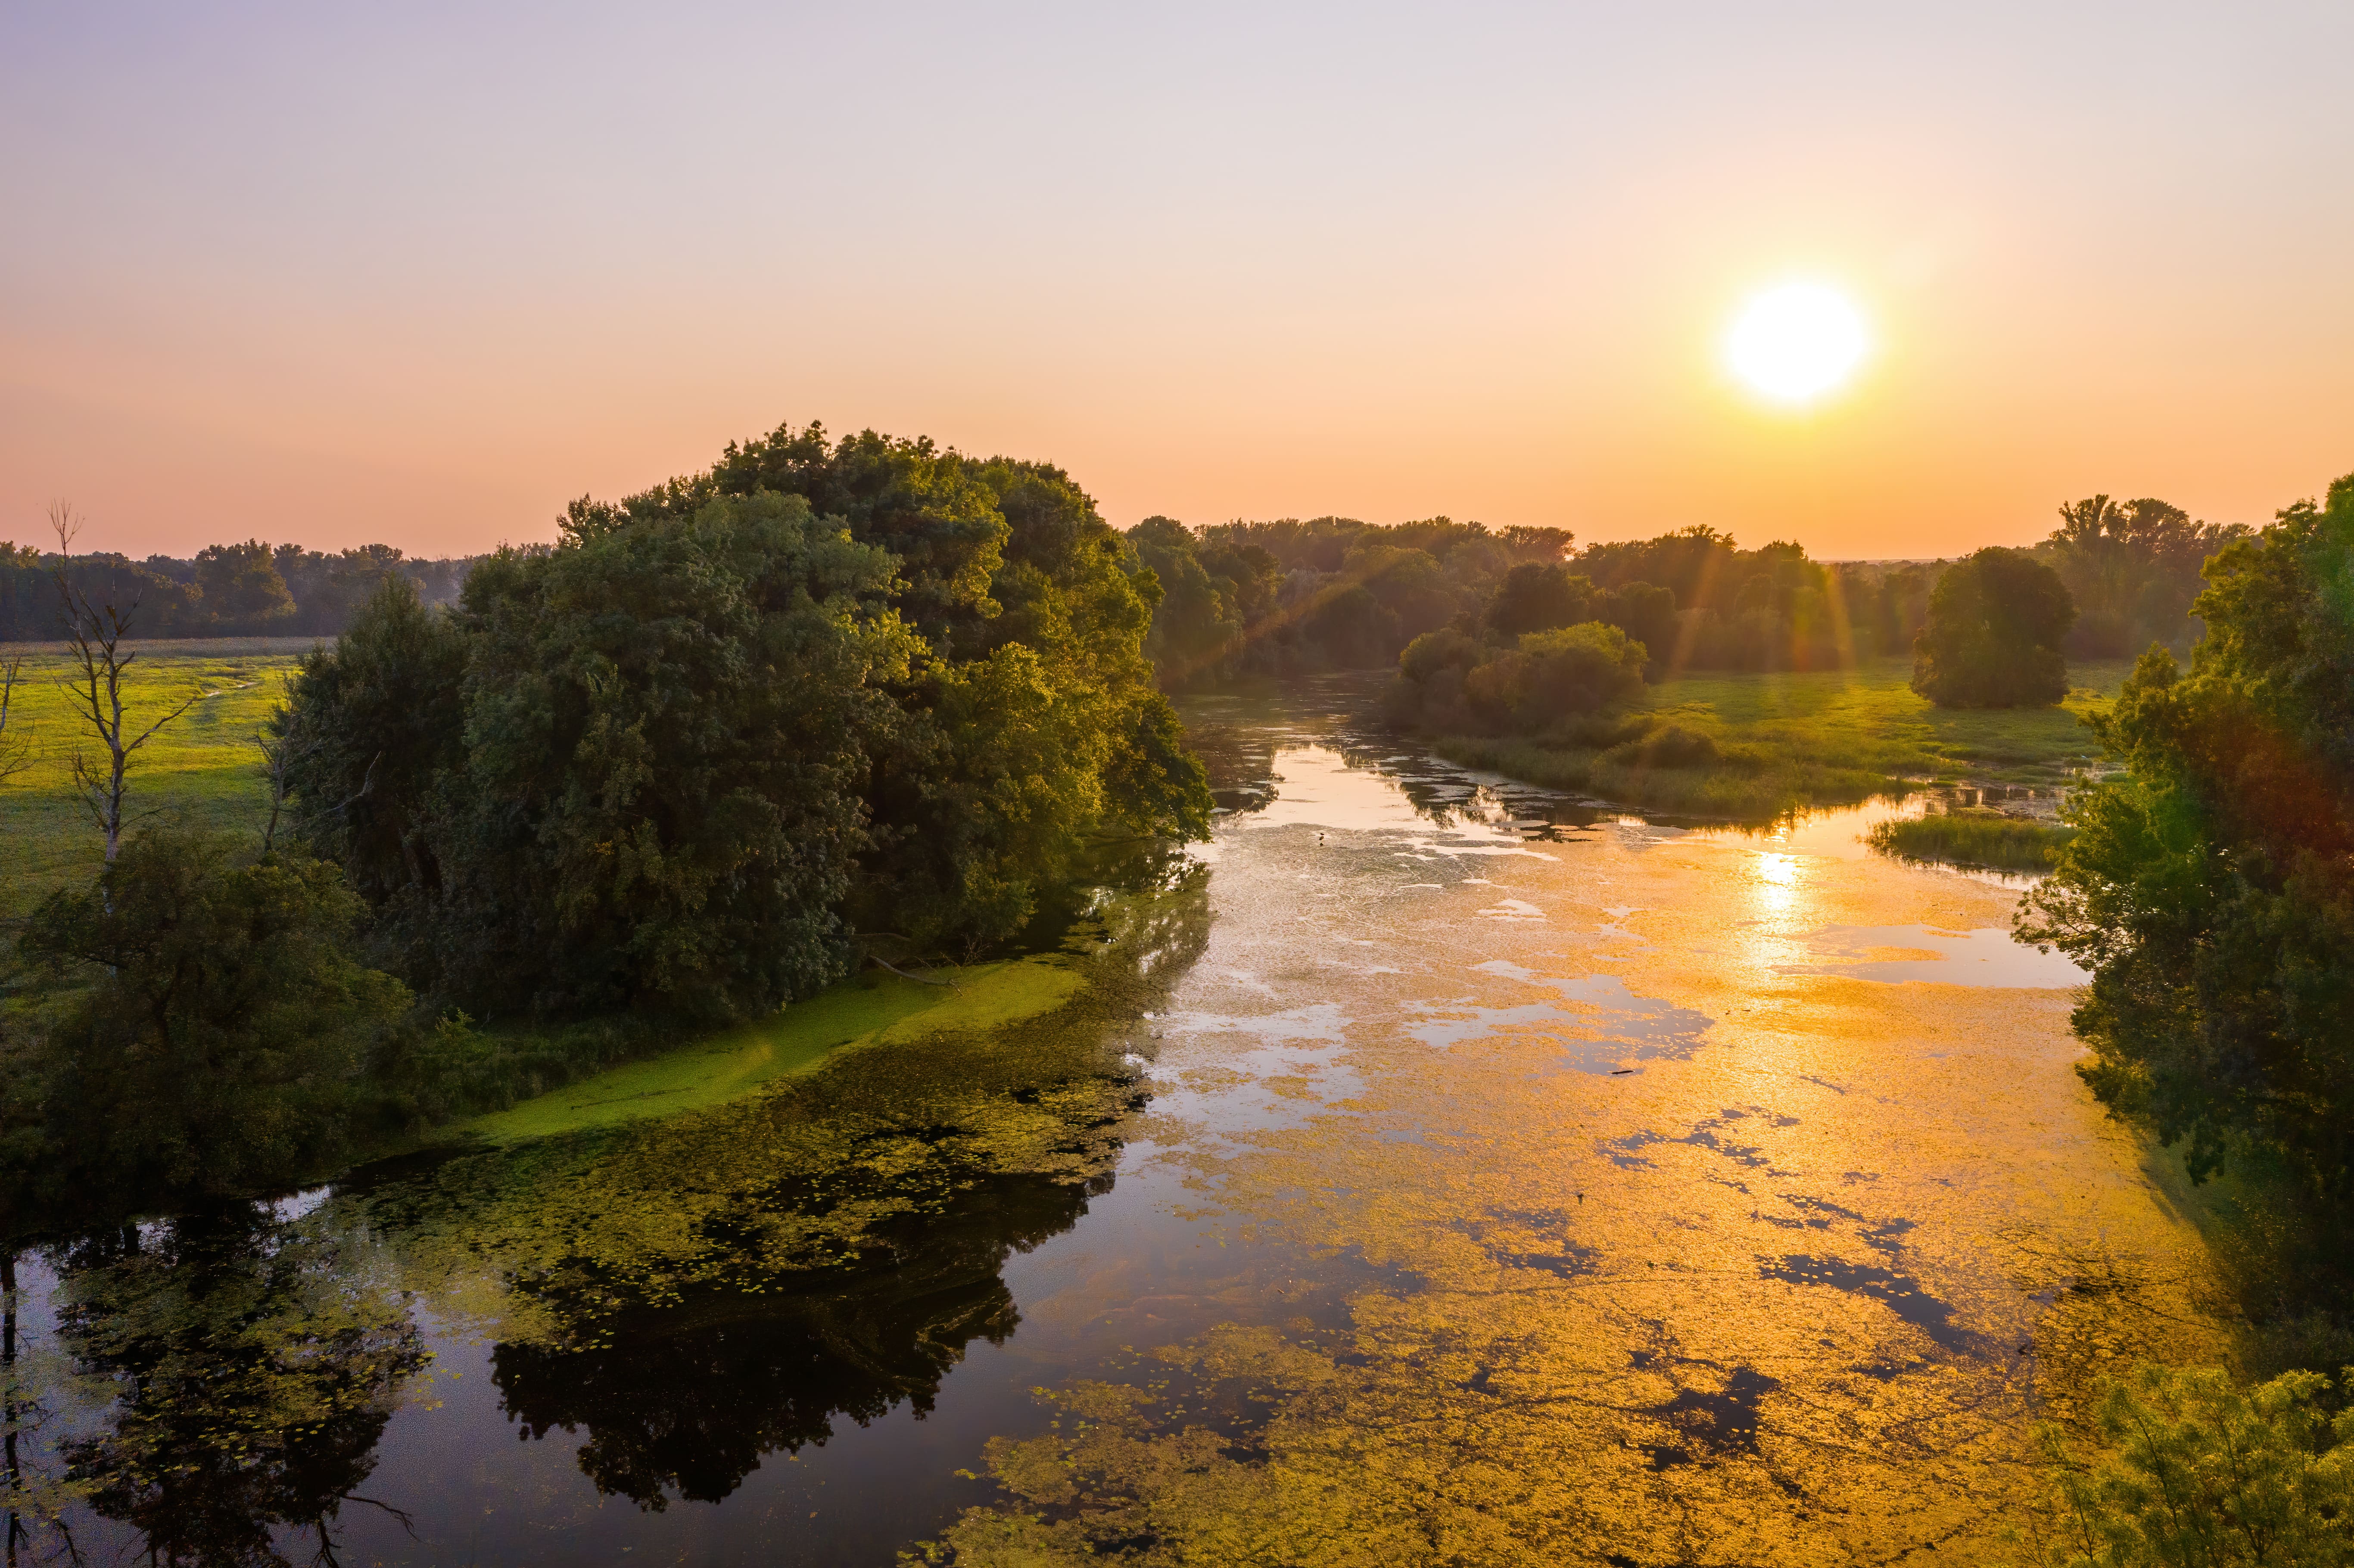 Sun setting over a river and trees in summer nature. Colorful evening outdoor scenery with green forest and water illuminated by warm light. Aerial view on fresh wilderness.